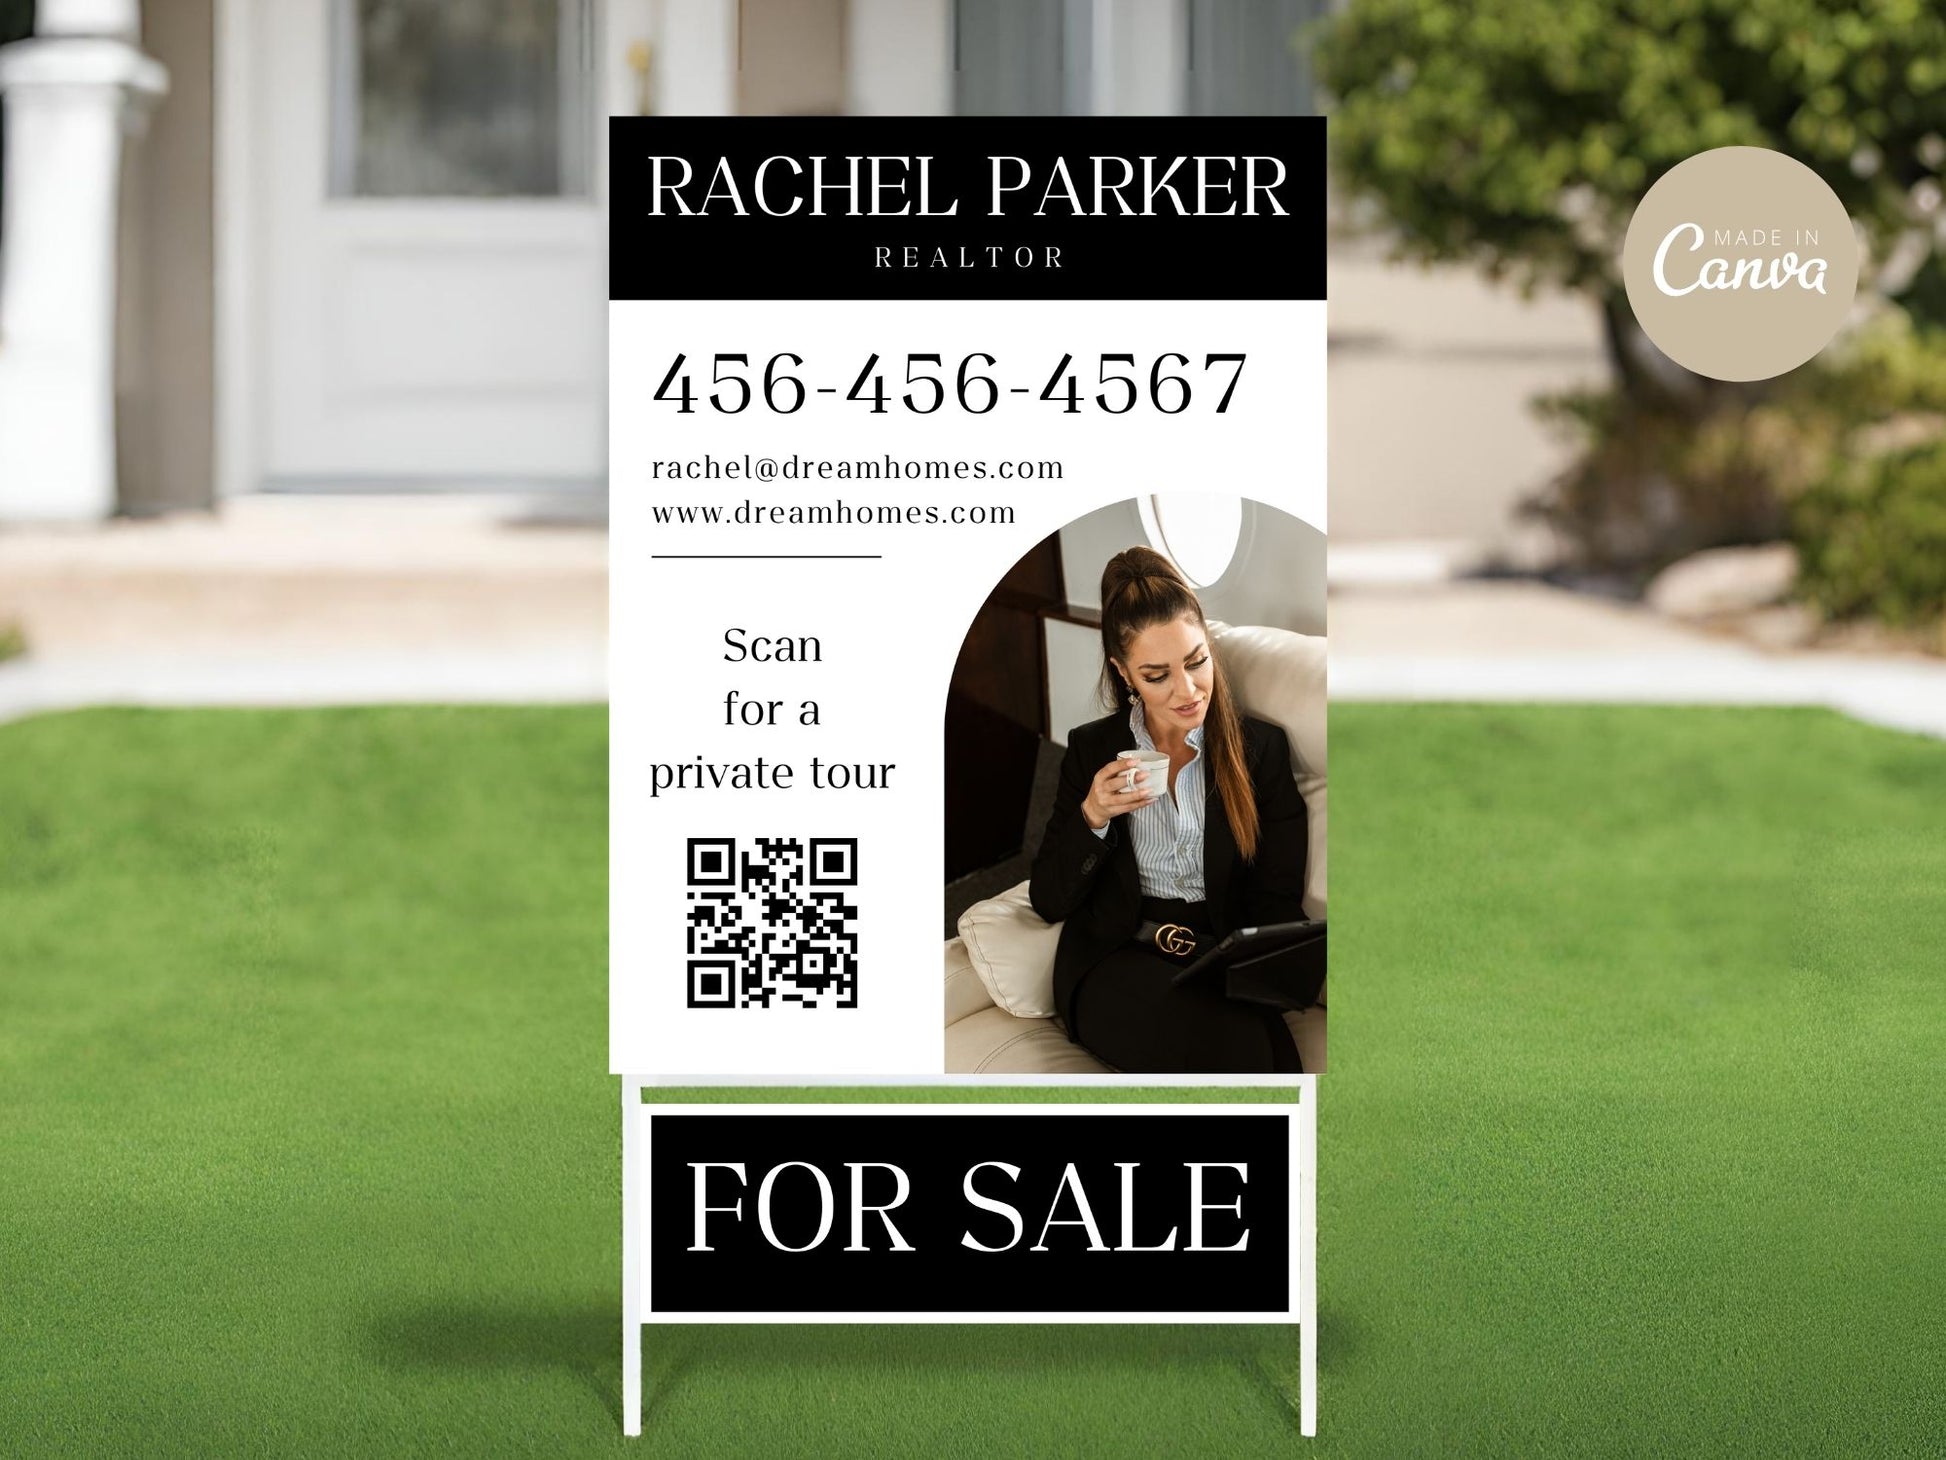 Black Luxury Yard Signs - Elegant and sophisticated yard signs for premium real estate listings.